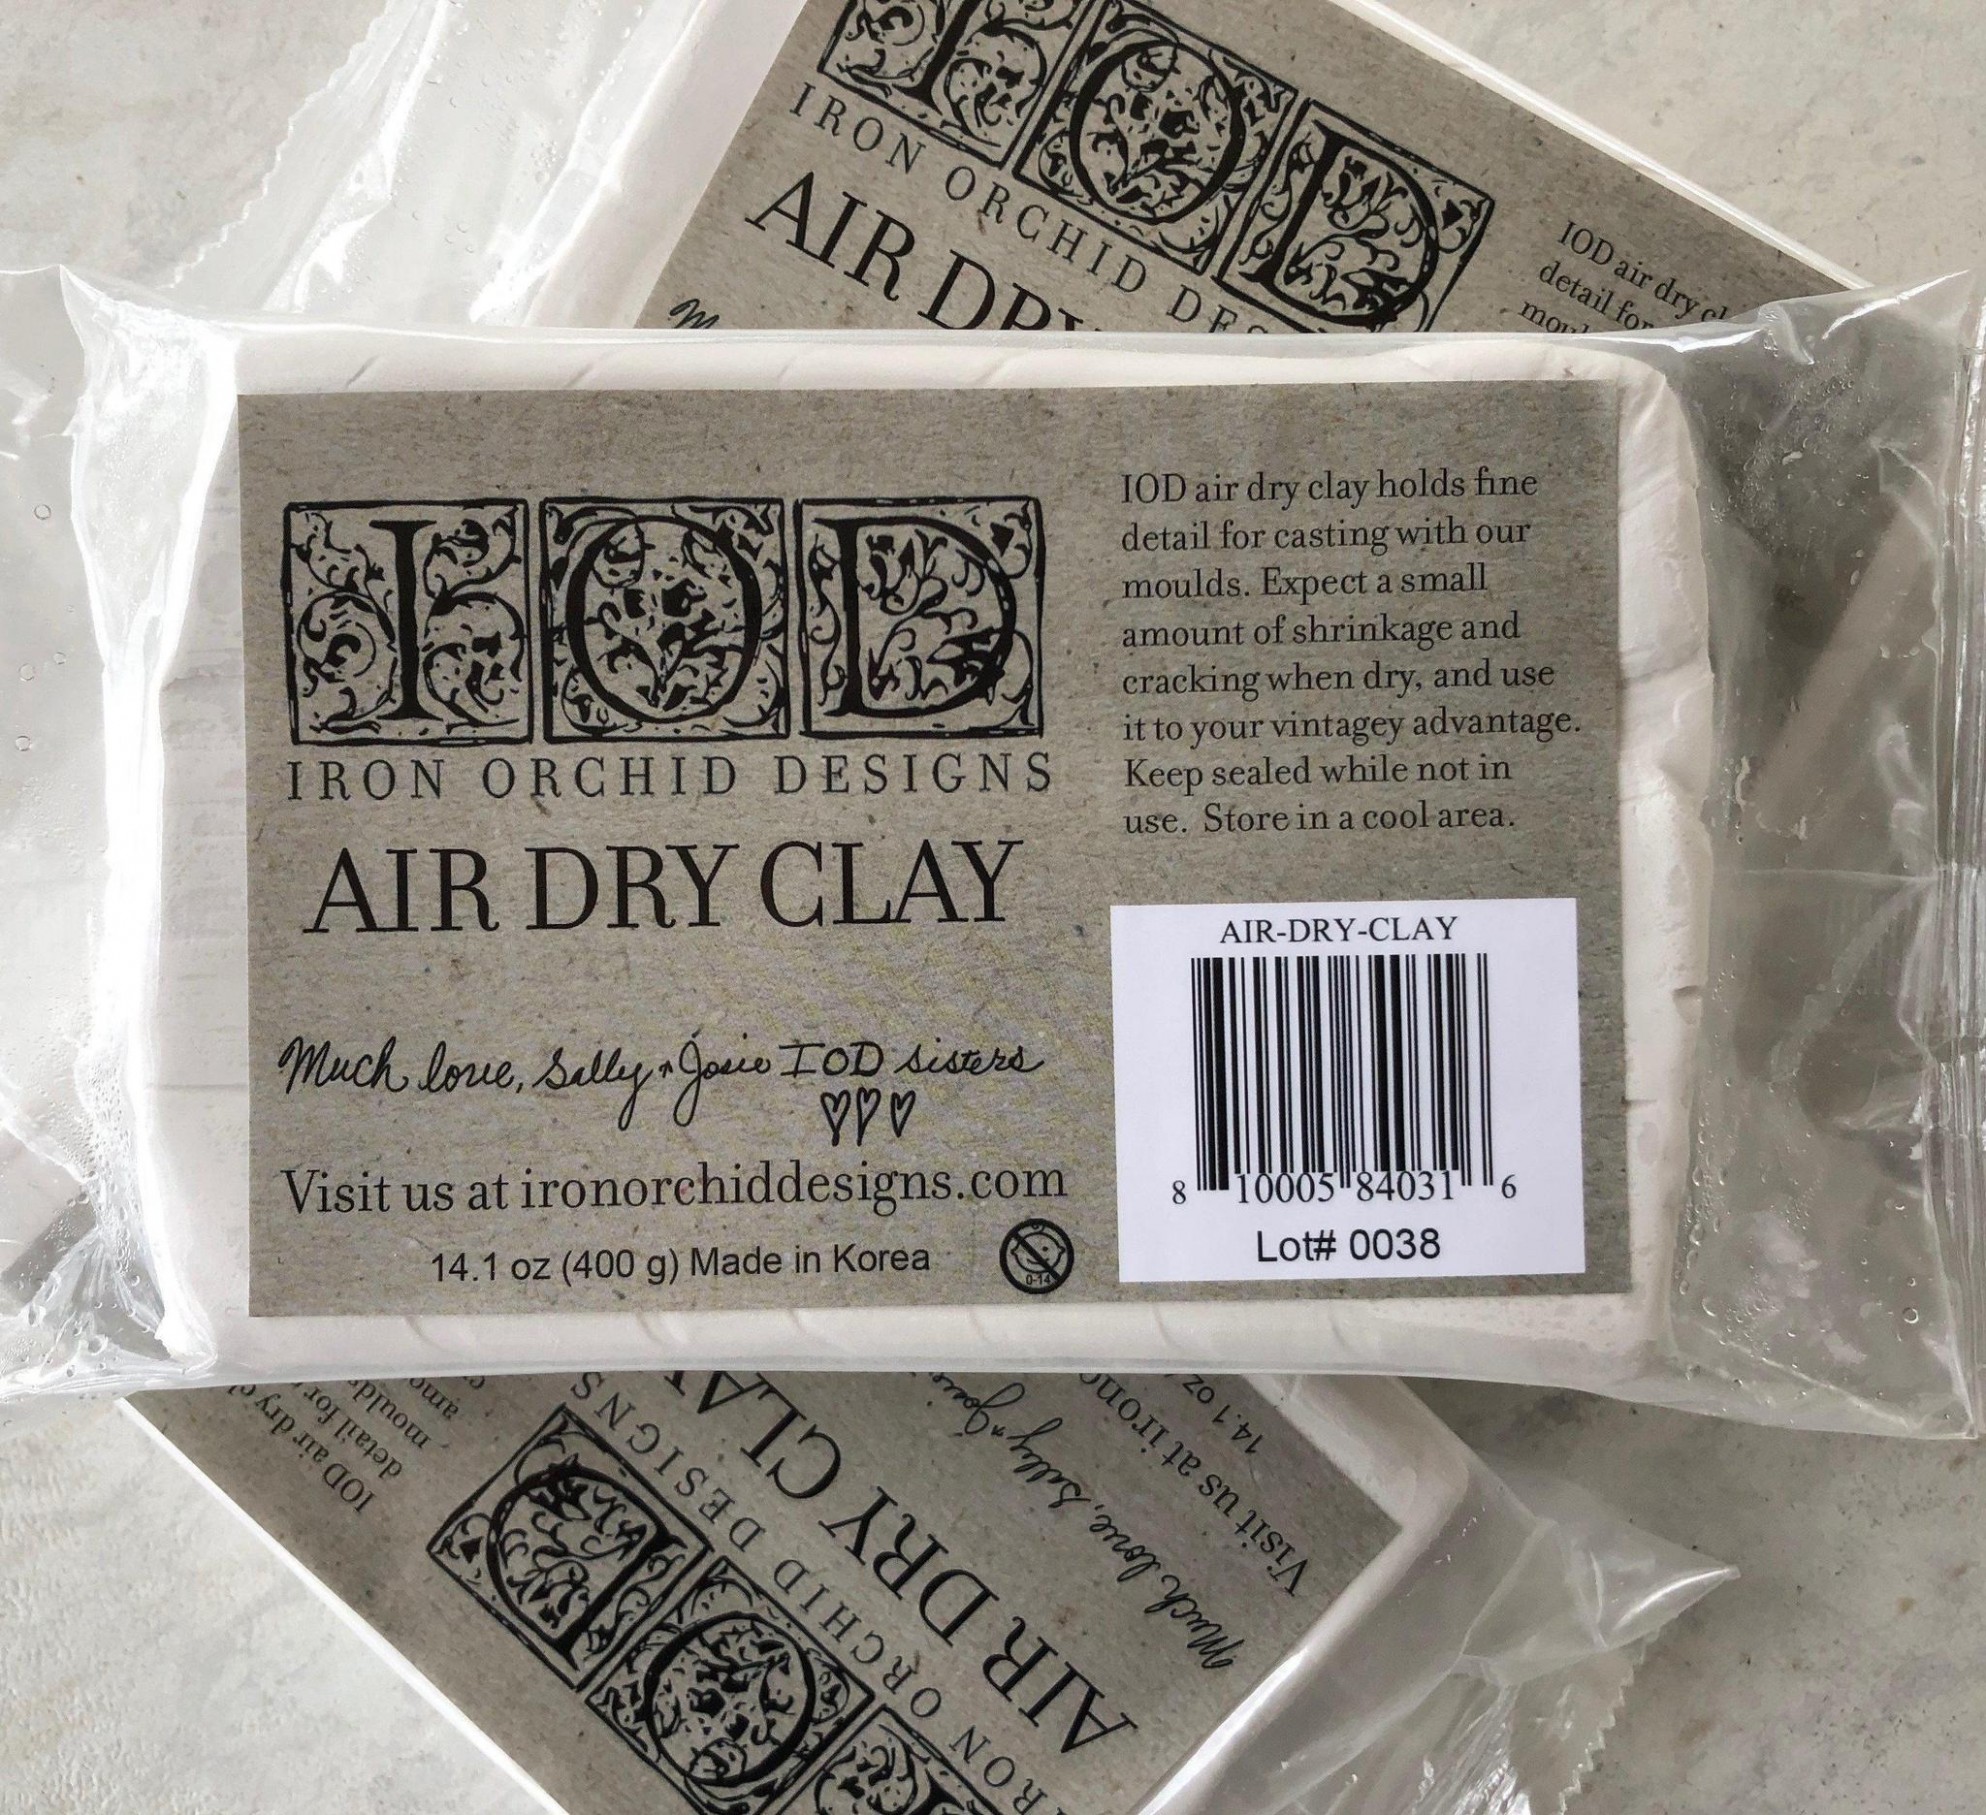 Iod Air Dry Clay By Iod Iron Orchid Designs Can You Paint Air Dry Clay While Wet